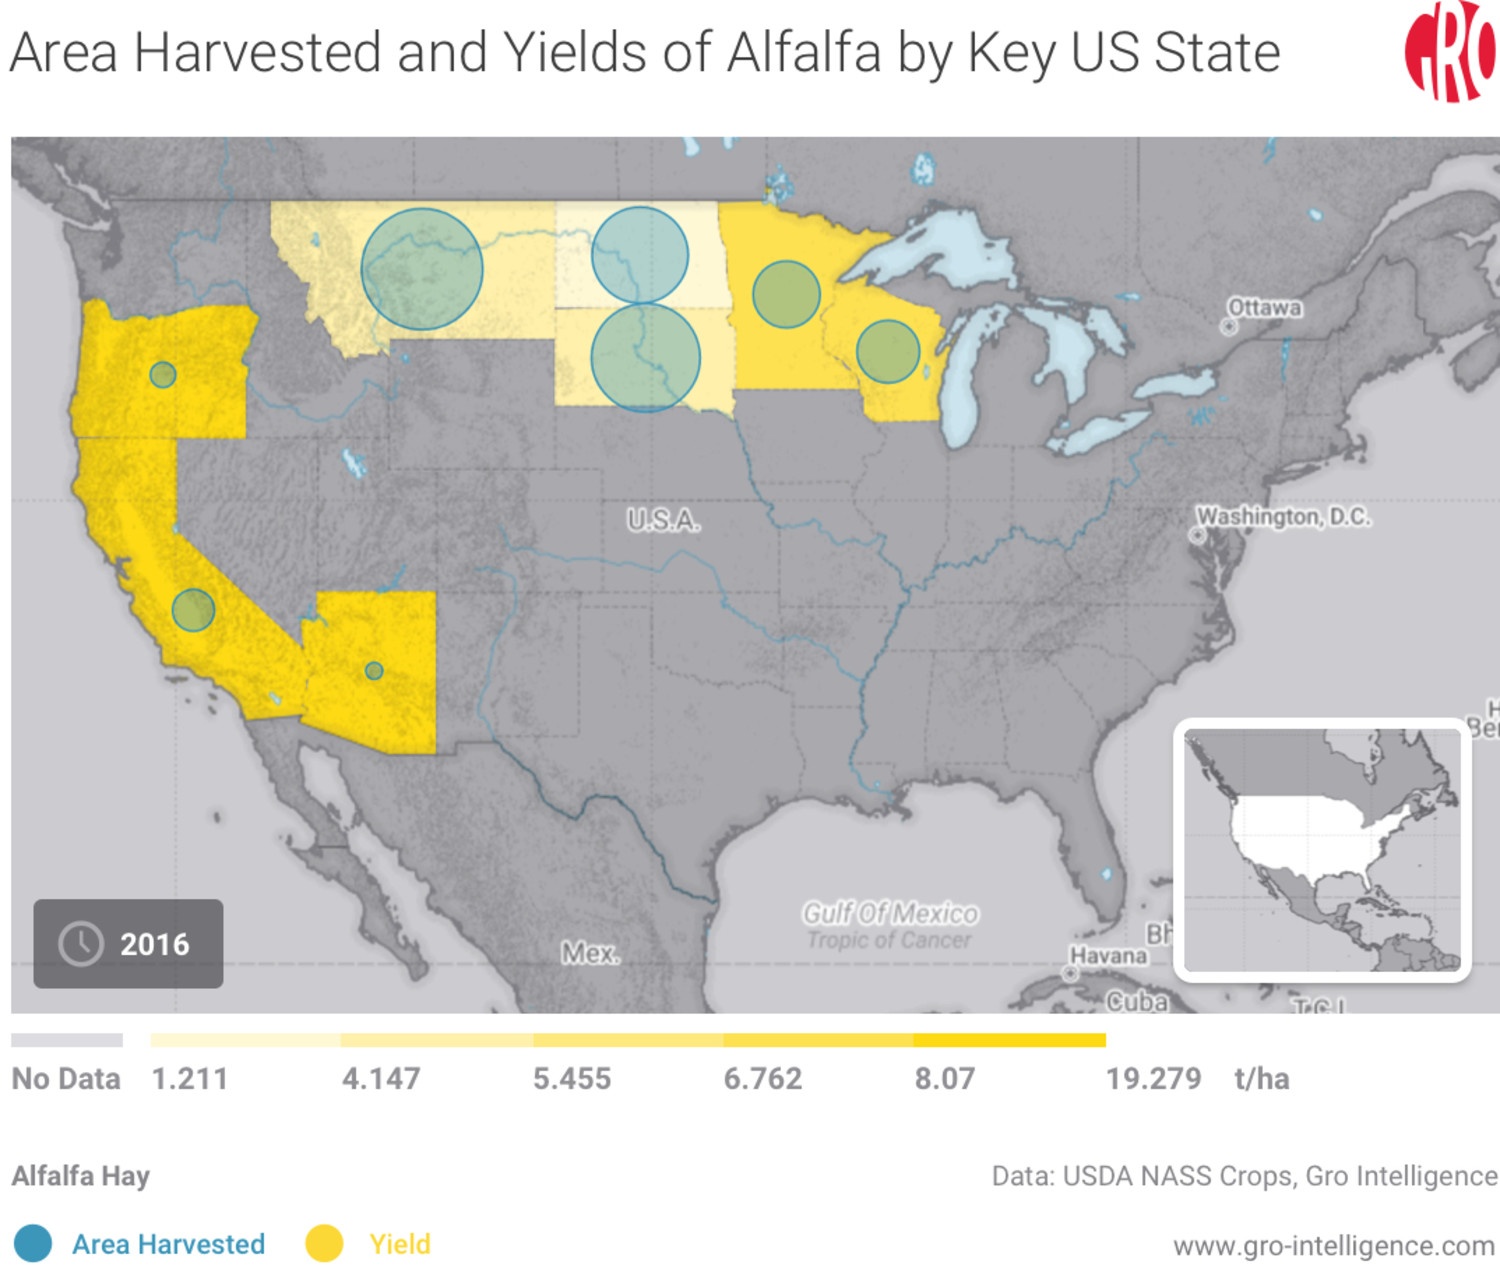 Area Harvested and Yields of Alfalfa by Key US State